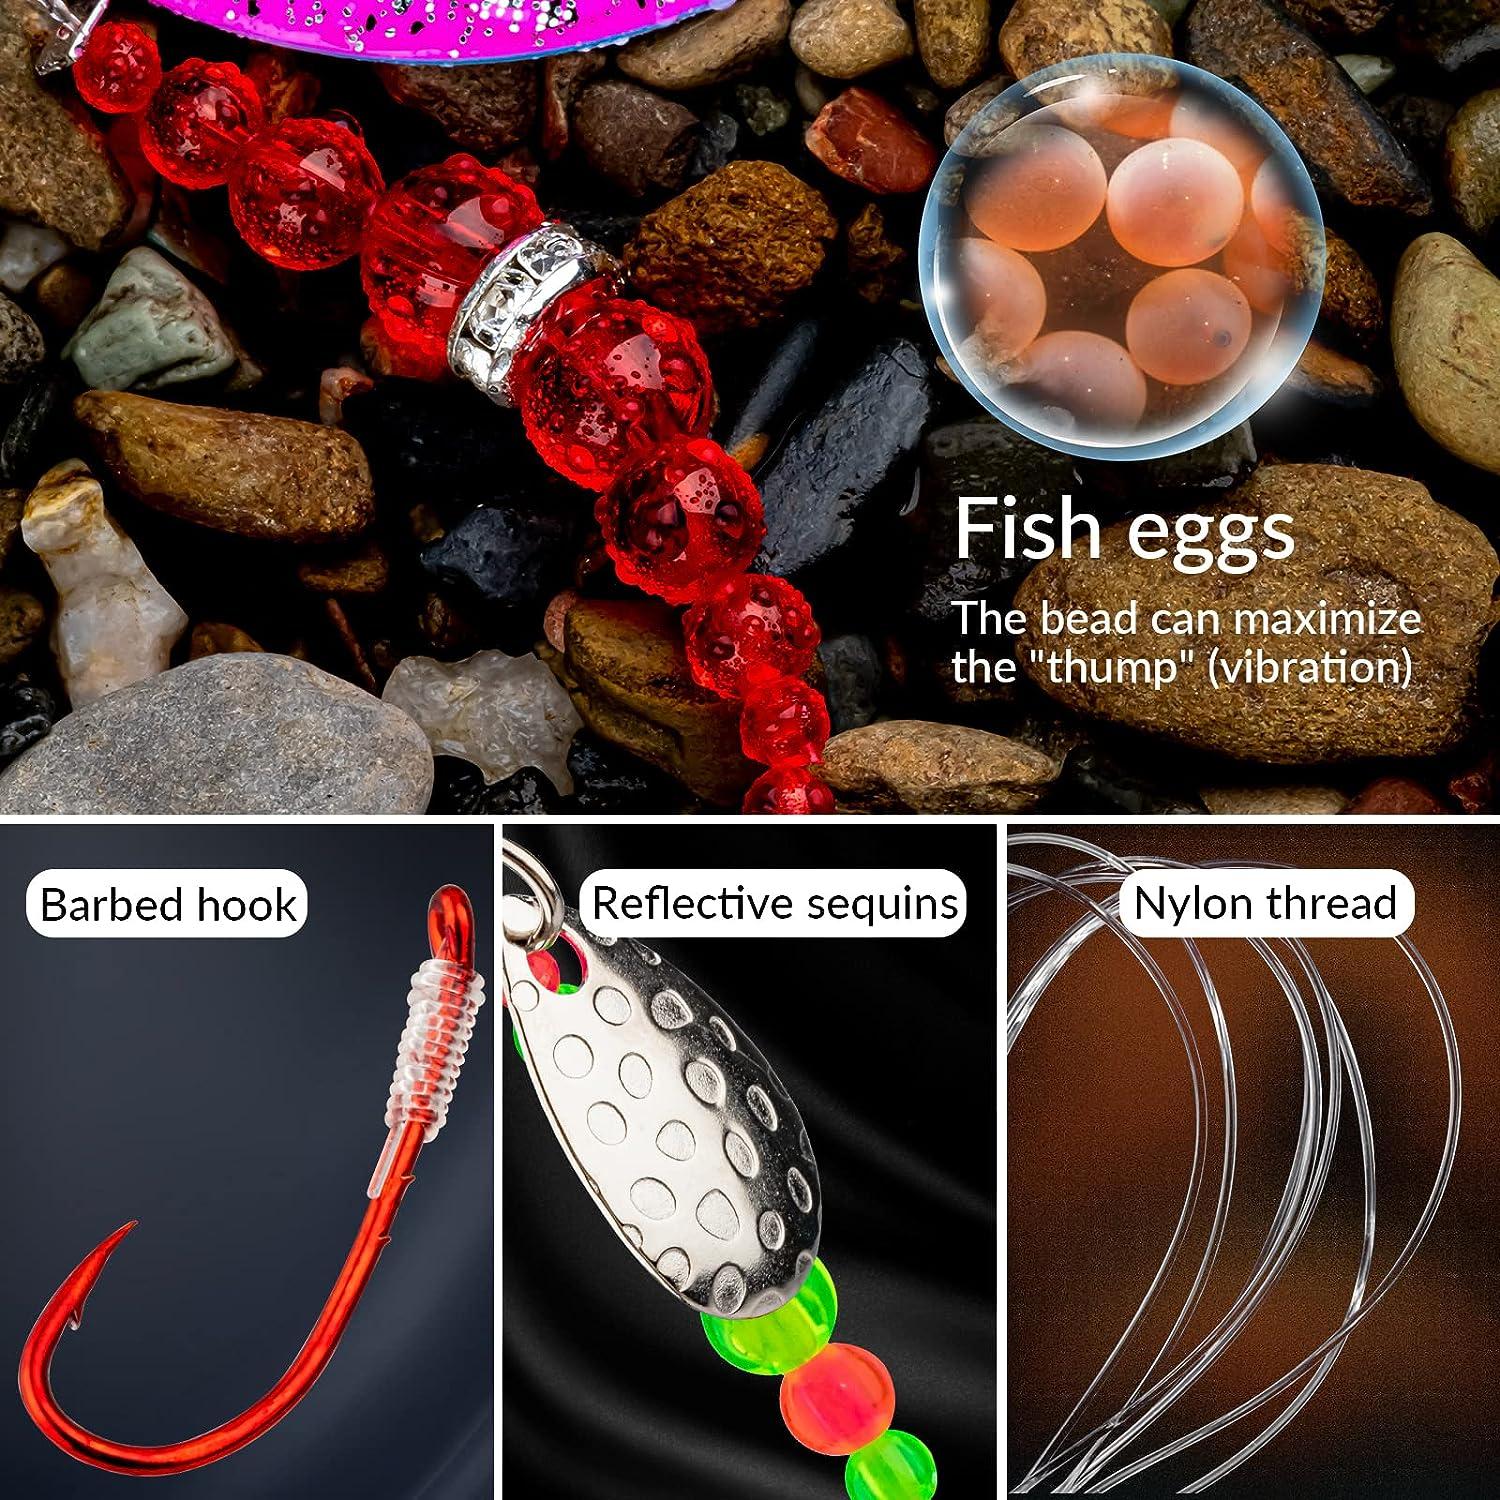 Sinking Type Vibration Fishing Lure With Noise Making Beads, For Both  Freshwater And Saltwater Fishing